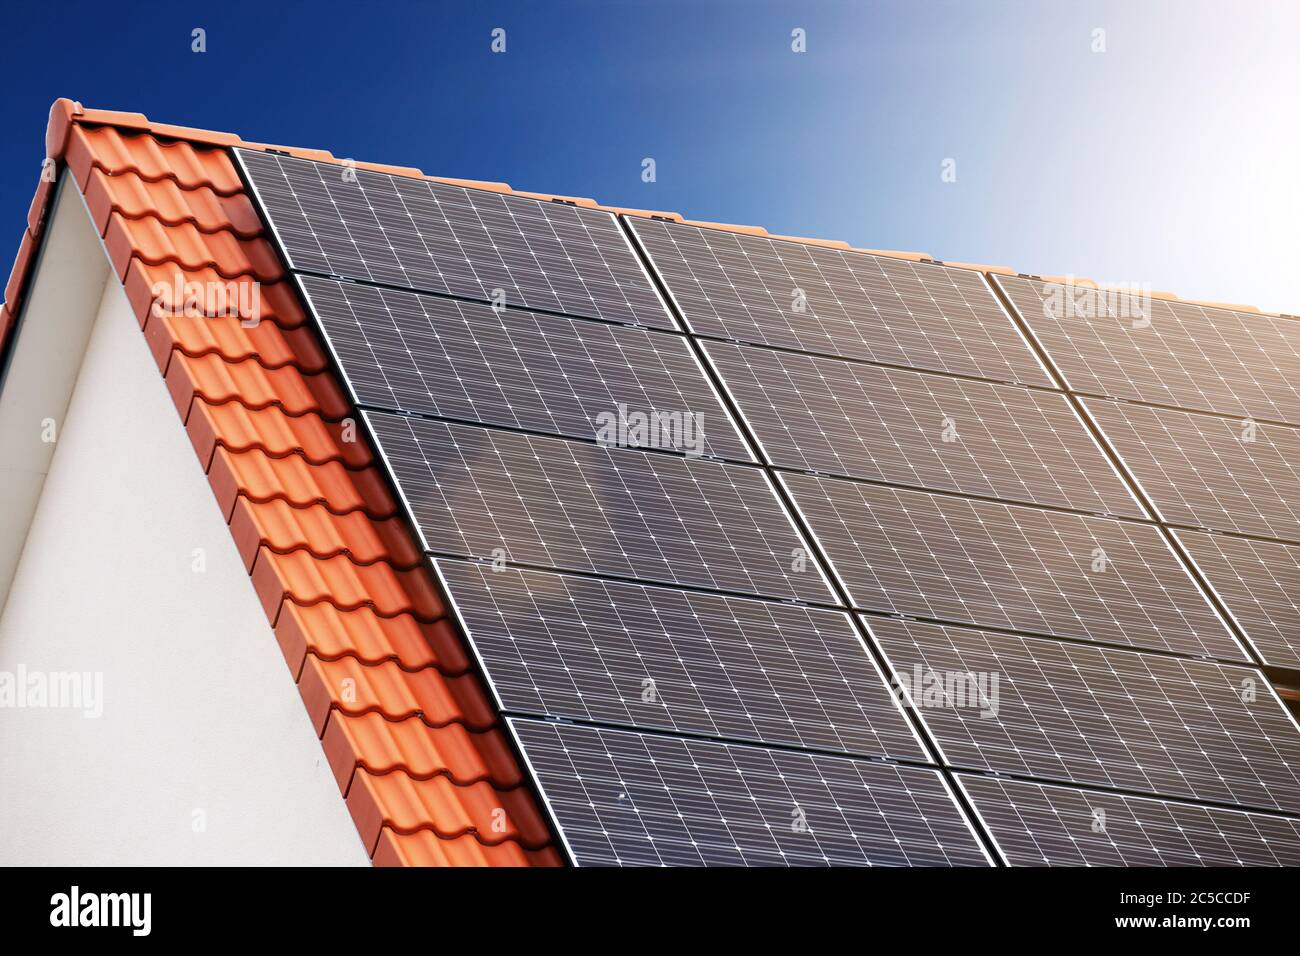 Single family house with solar system or photovoltaic system Stock Photo